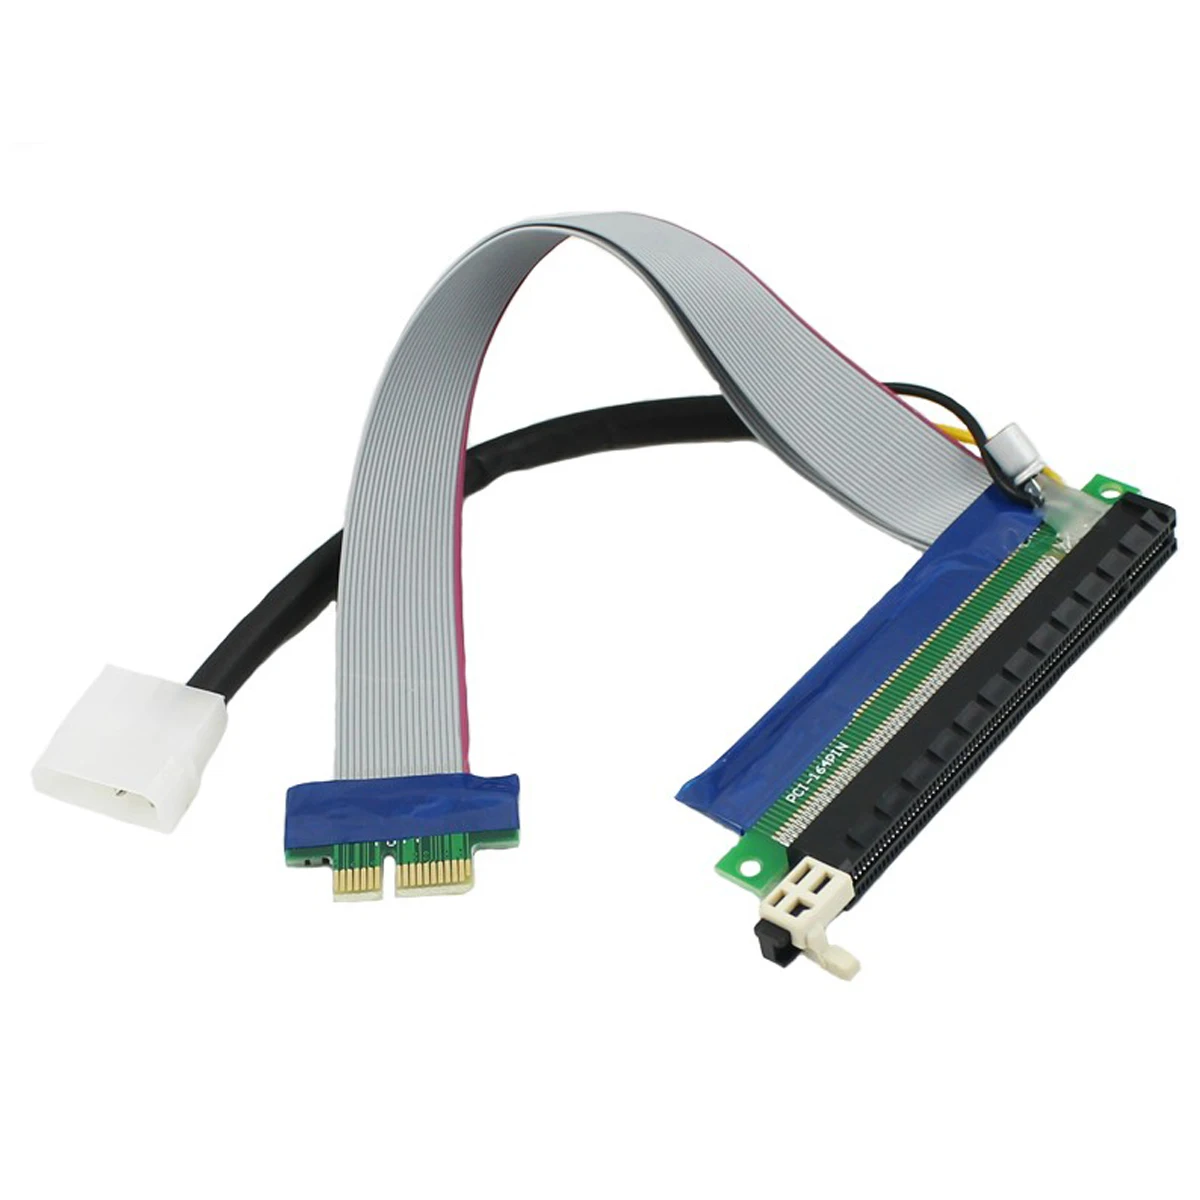 

PCI-E Express 1x to 16x Flex Extension Cable Extender Riser Card Converter Adapter with 4pin Power 20cm